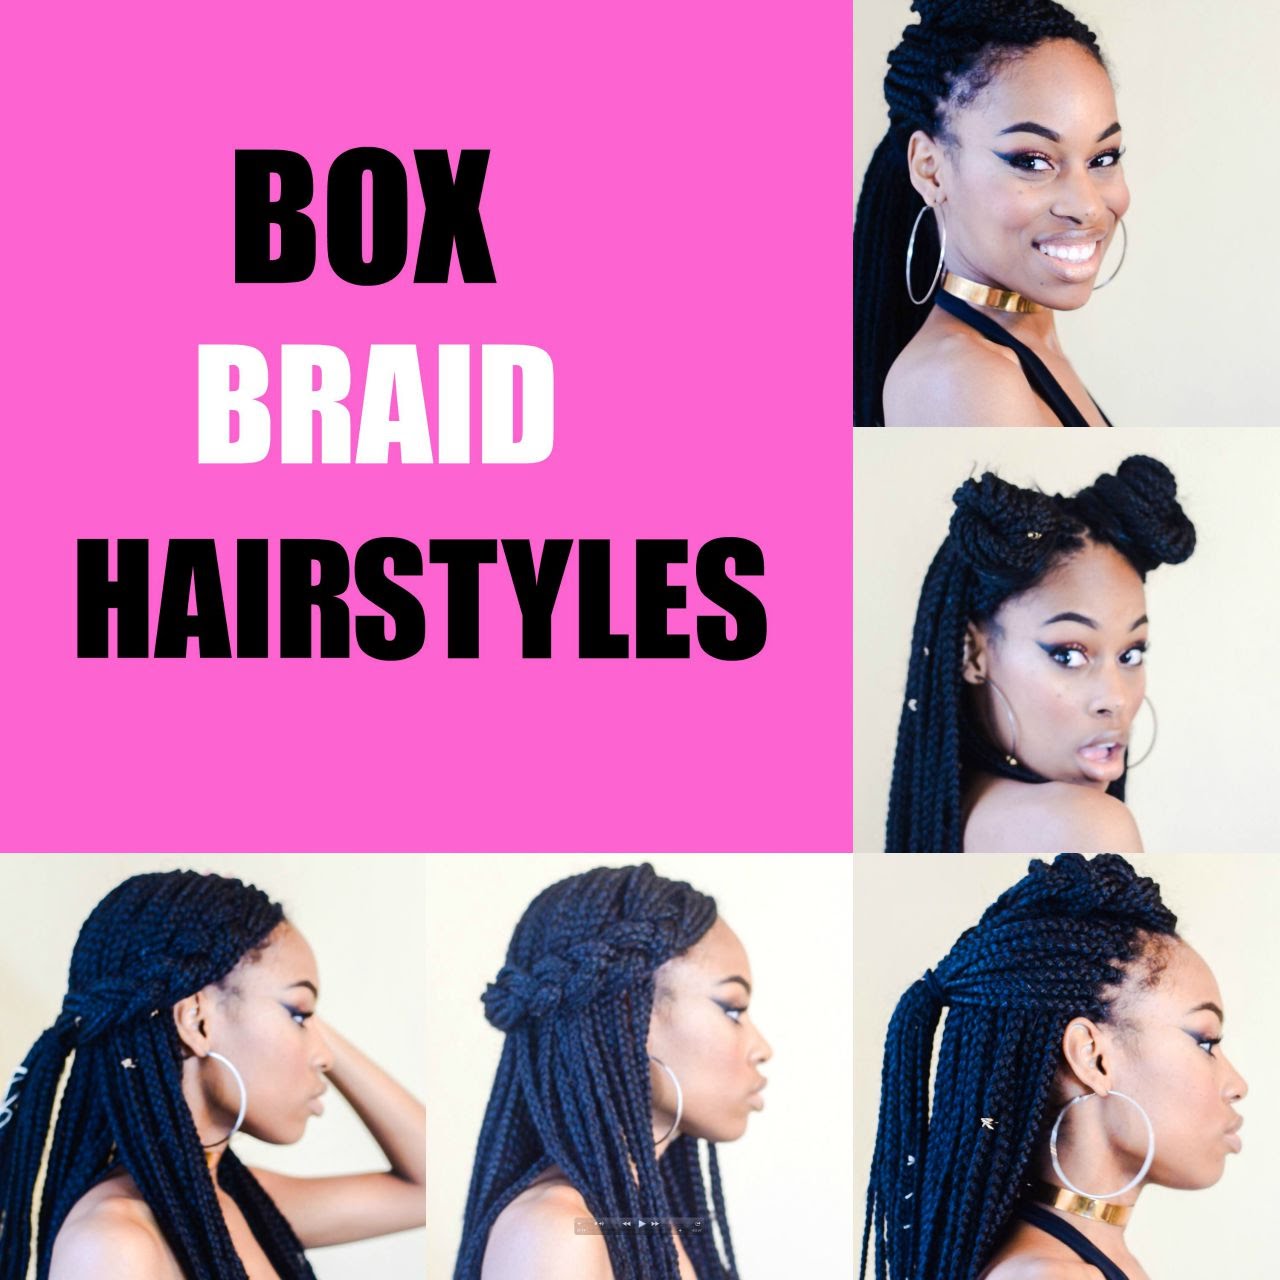 38 Quick and Easy Braided Hairstyles